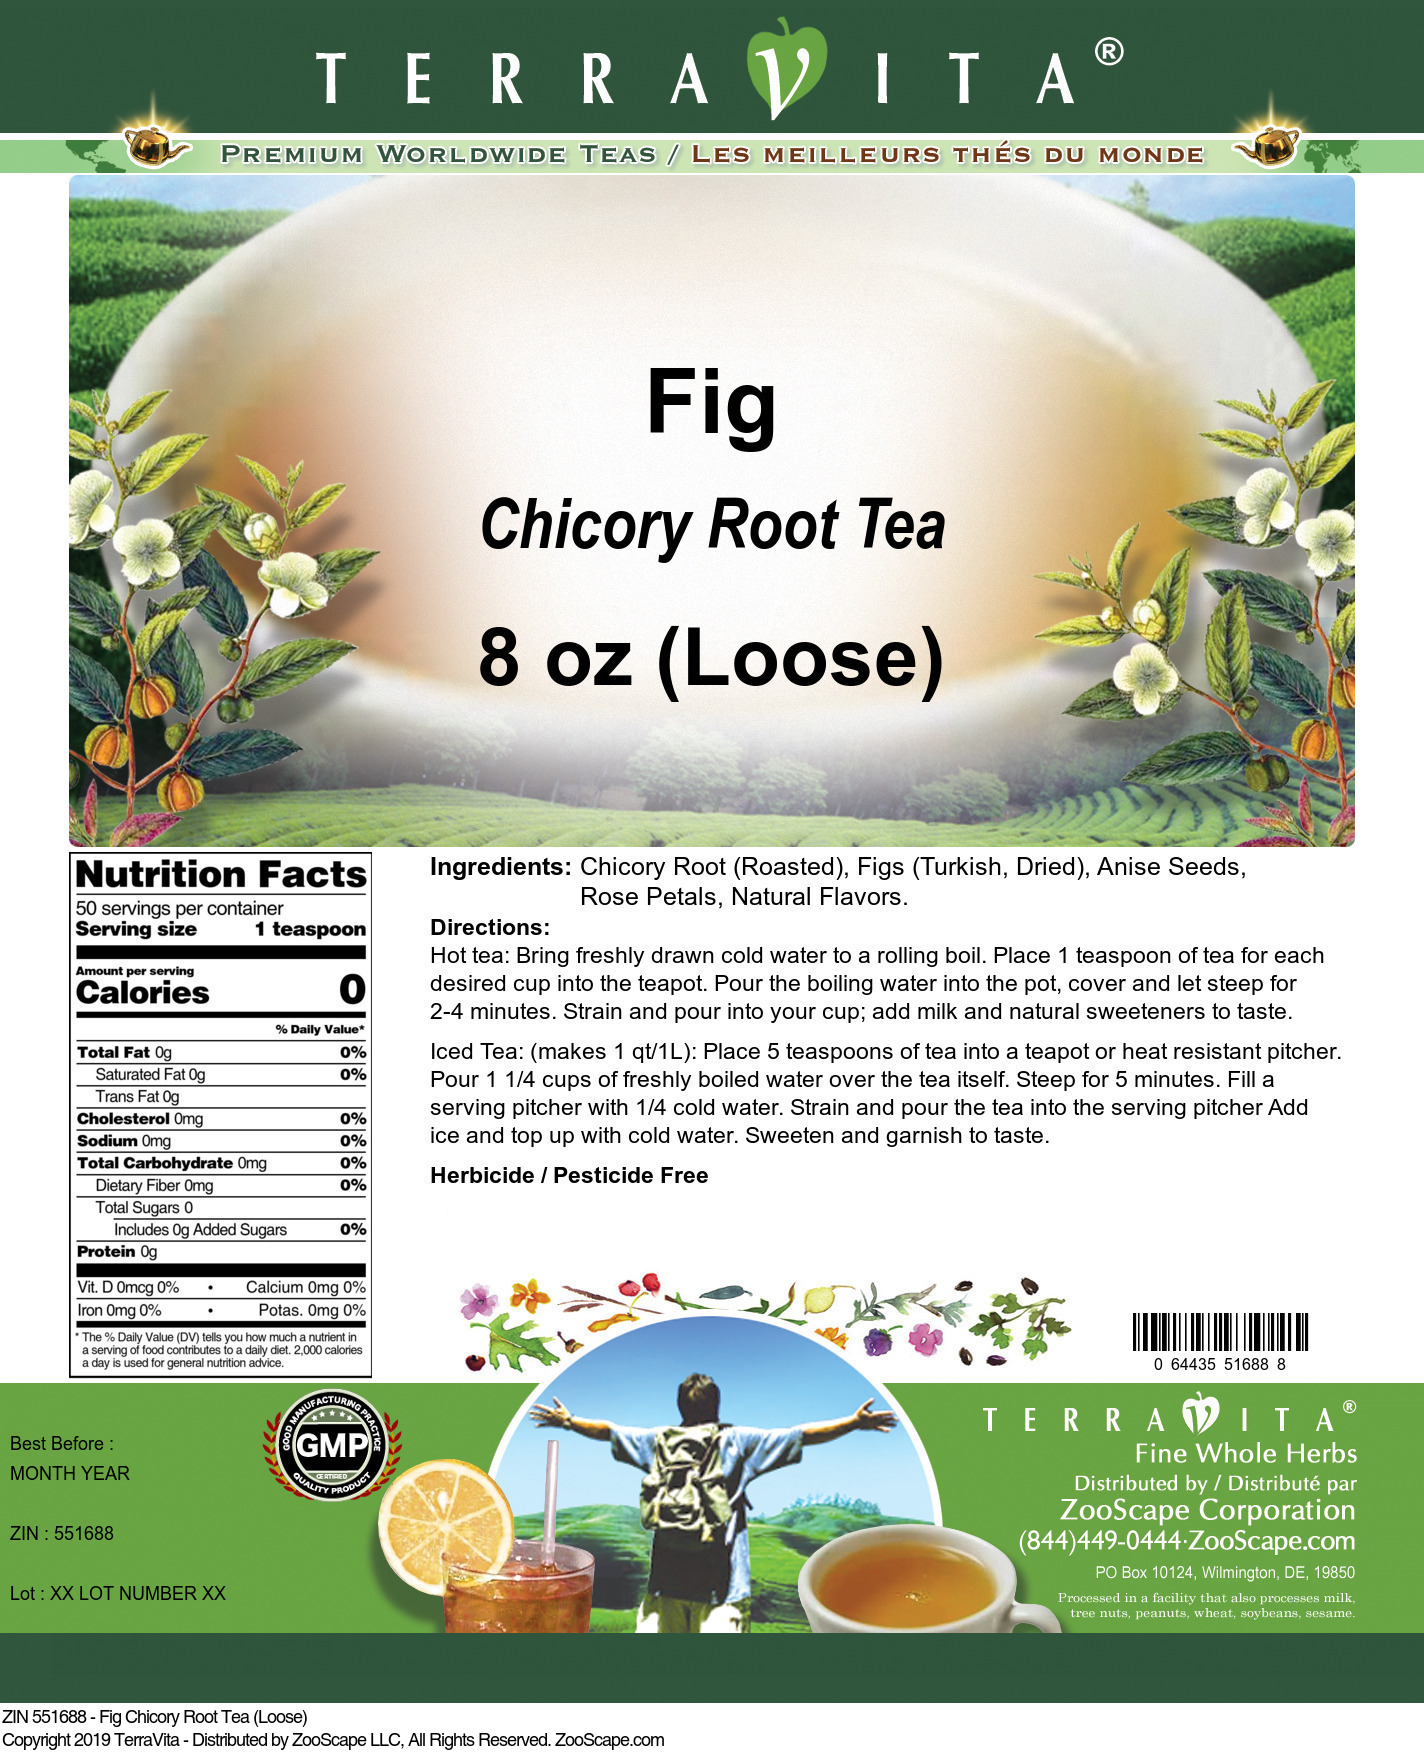 Fig Chicory Root Tea (Loose) - Label